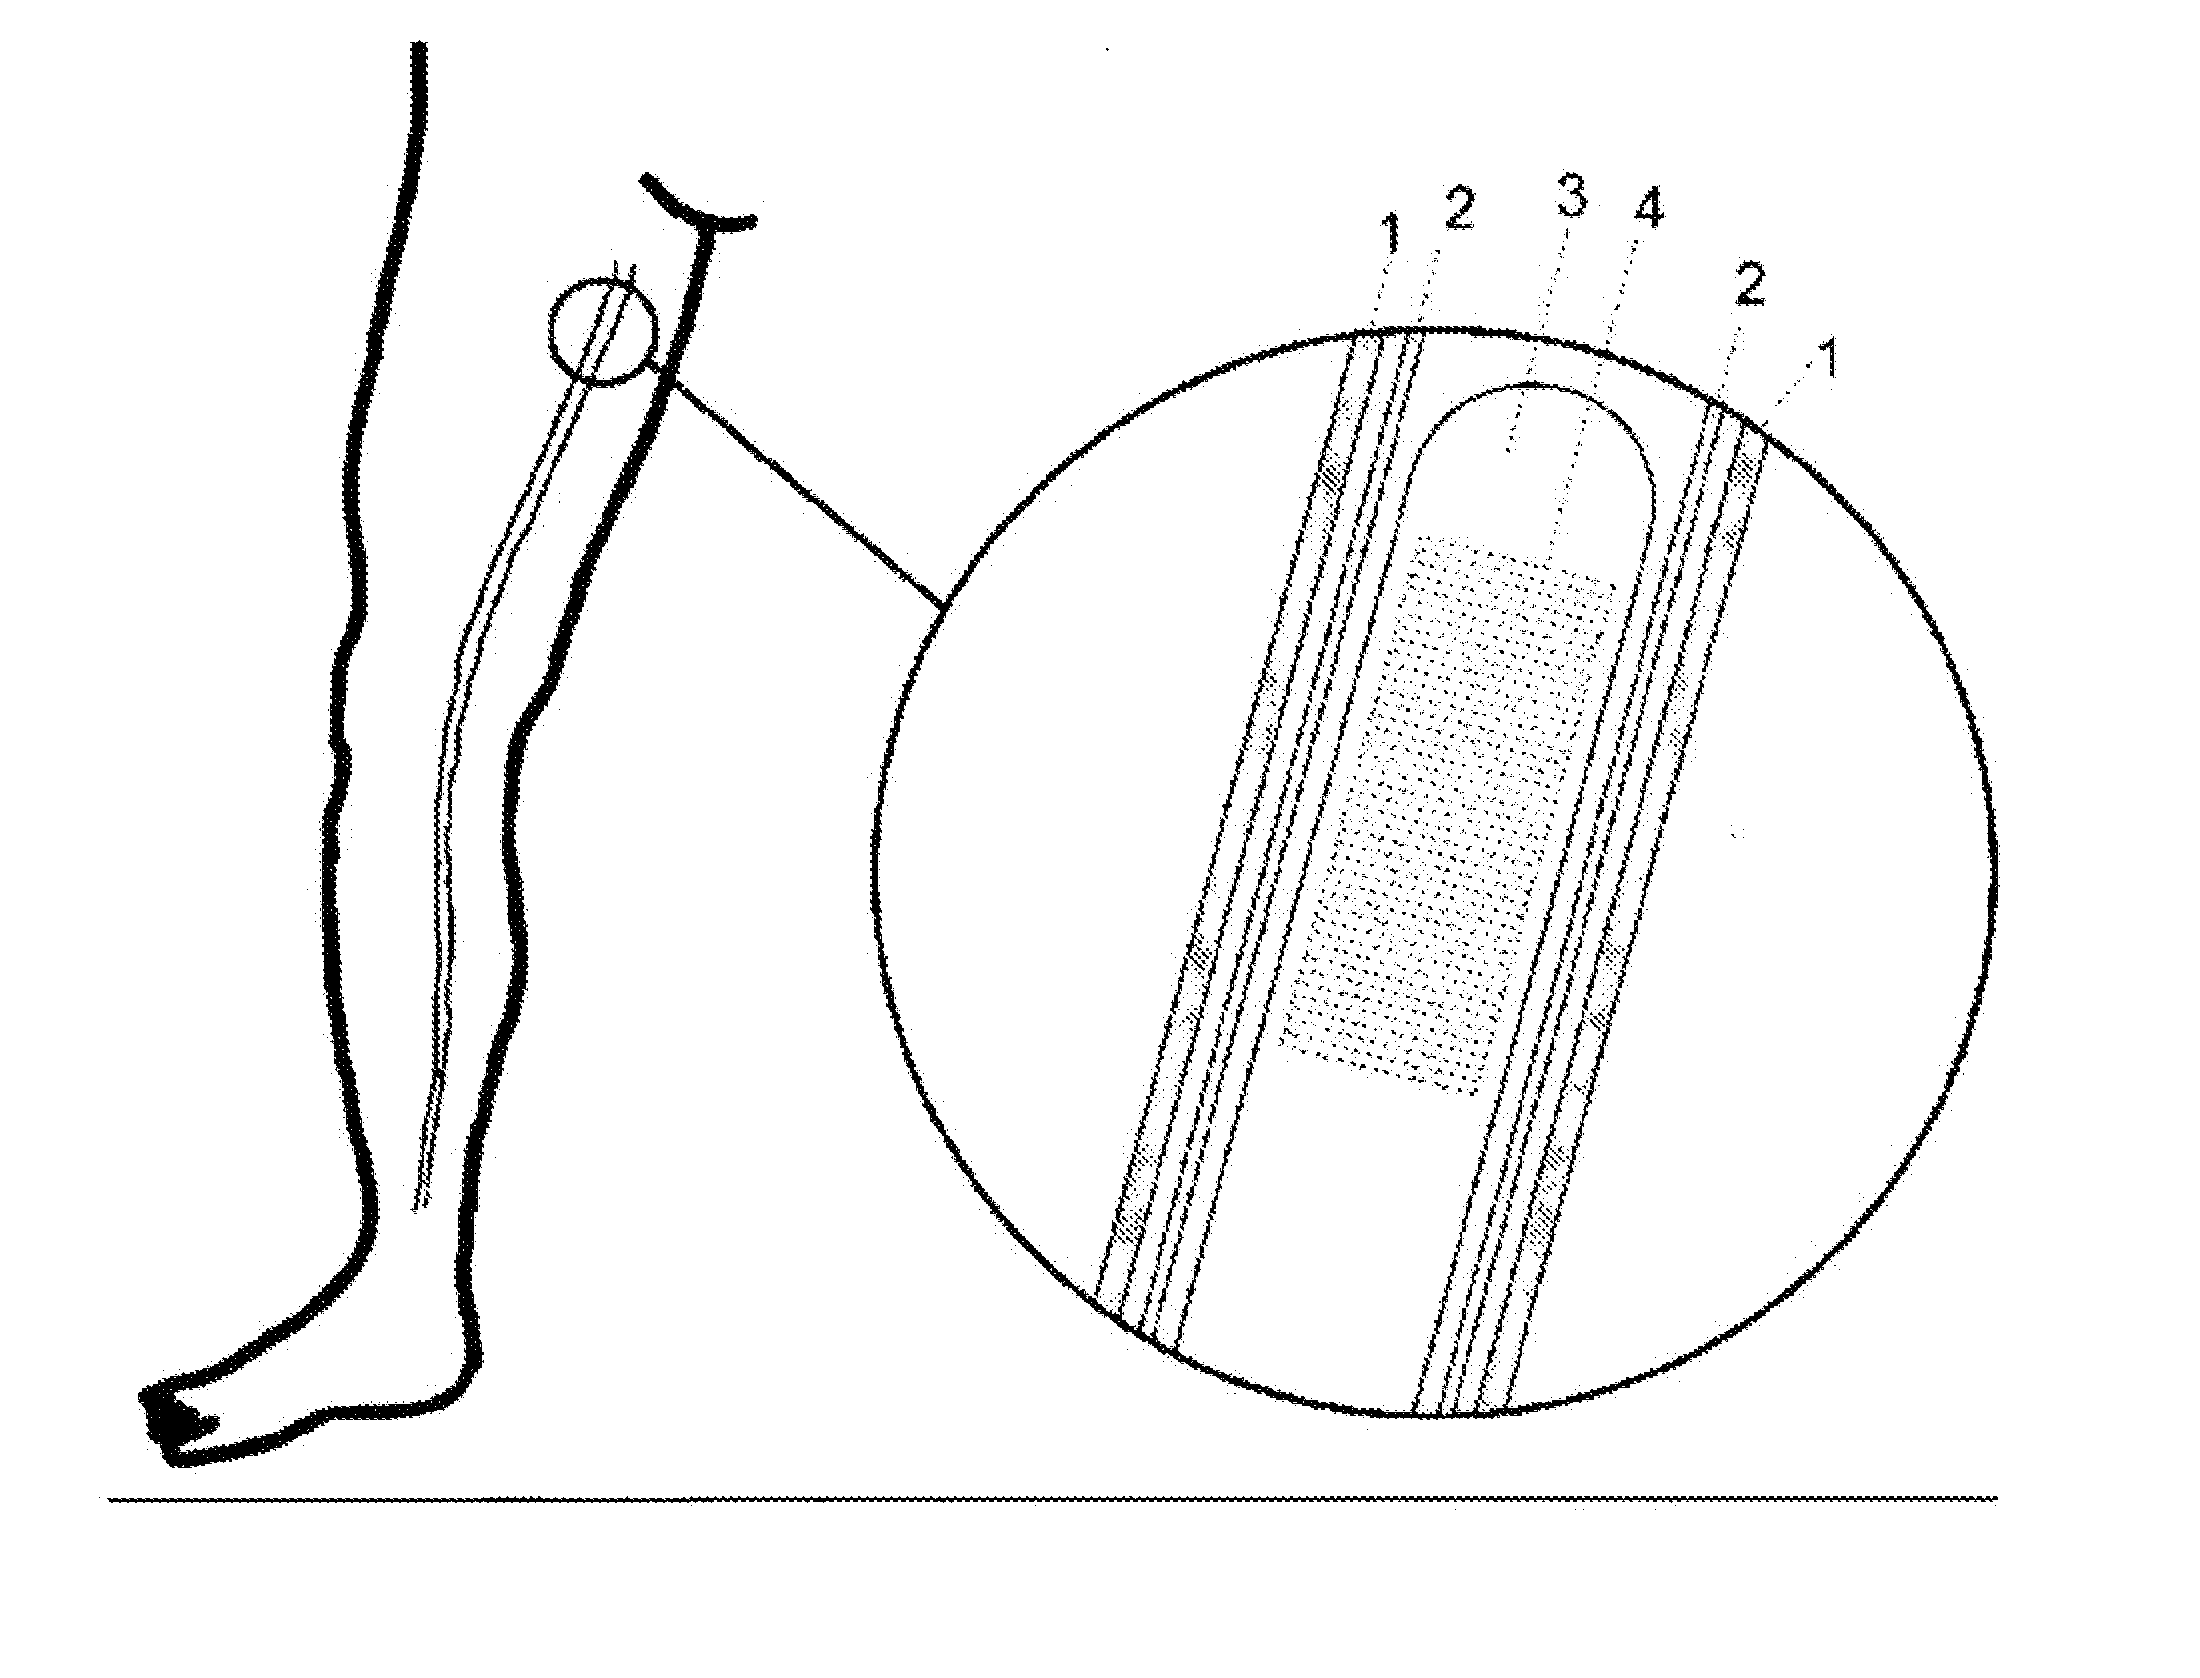 Light-Based Method for the Endovascular Treatment of Pathologically Altered Blood Vessels